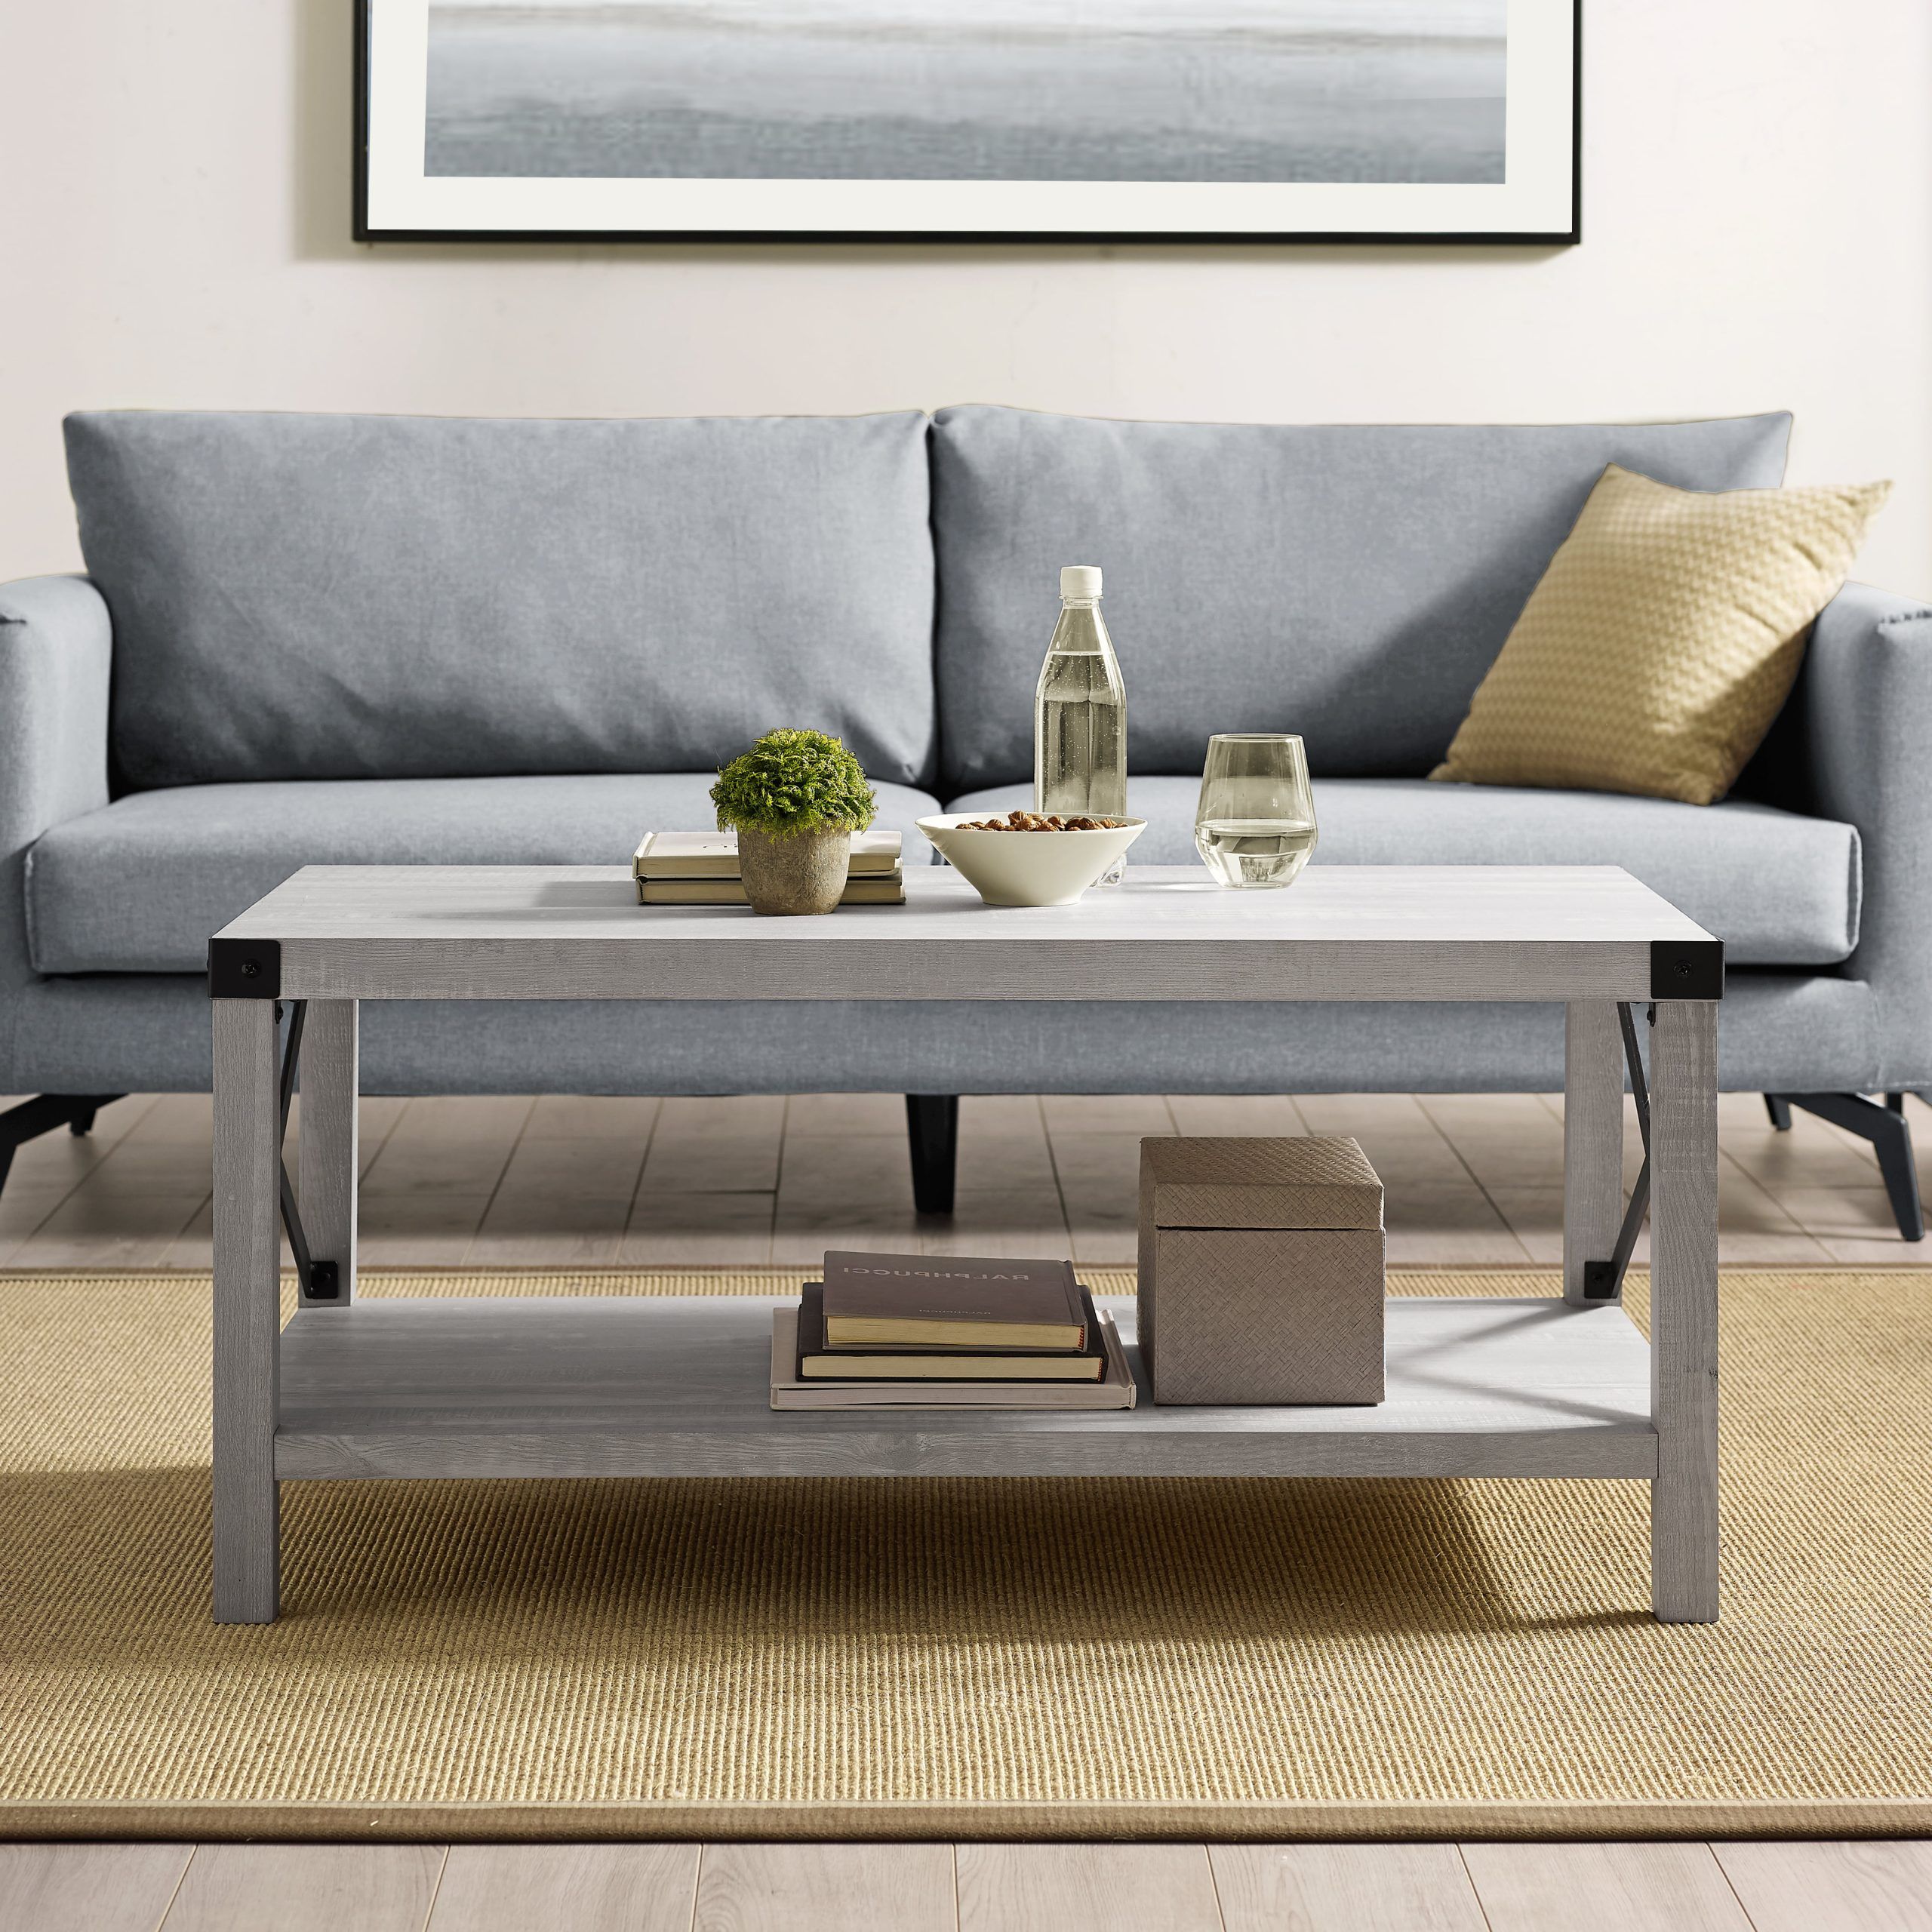 Woven Paths Magnolia Metal X Coffee Table, Stone Grey – Walmart Pertaining To Woven Paths Coffee Tables (View 7 of 20)